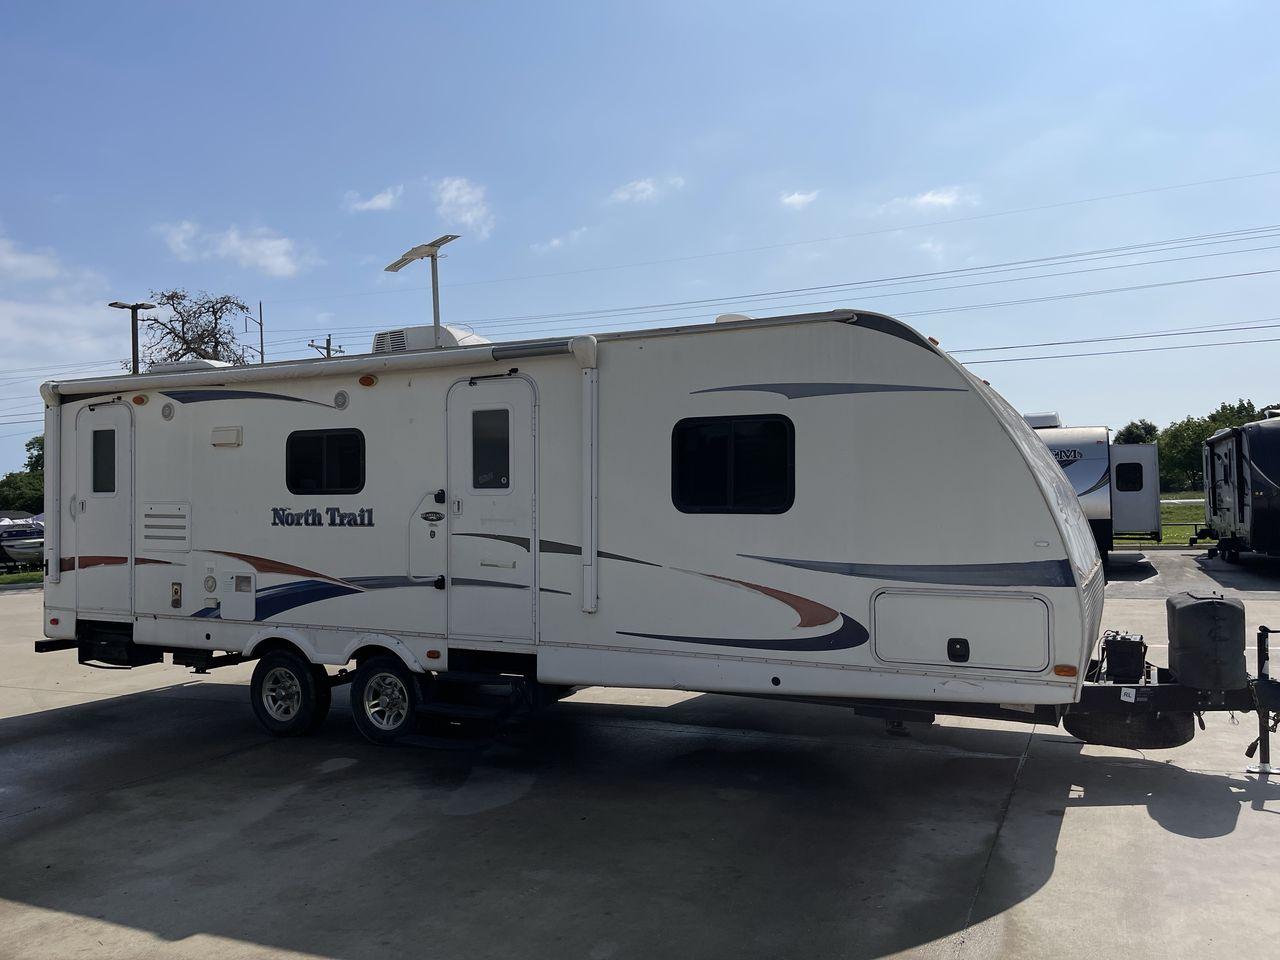 2011 WHITE HEARTLAND NORTH TRAIL 26B (5SFNB3225BE) , Length: 32.5 ft. | Dry Weight: 7,104 lbs. | Gross Weight: 8,600 lbs. | Slides: 2 transmission, located at 4319 N Main St, Cleburne, TX, 76033, (817) 678-5133, 32.385960, -97.391212 - Enjoy a spontaneous weekend getaway in this 2011 Heartland North Trail 26BRSS Travel Trailer! It is a dual-axle steel wheel setup measuring 32.5 ft. in length and 10.83 ft. in height. It has a dry weight of 7,104 lbs. and a GVWR of 8,600 lbs. It is equipped with automatic heating and cooling rated a - Photo #21